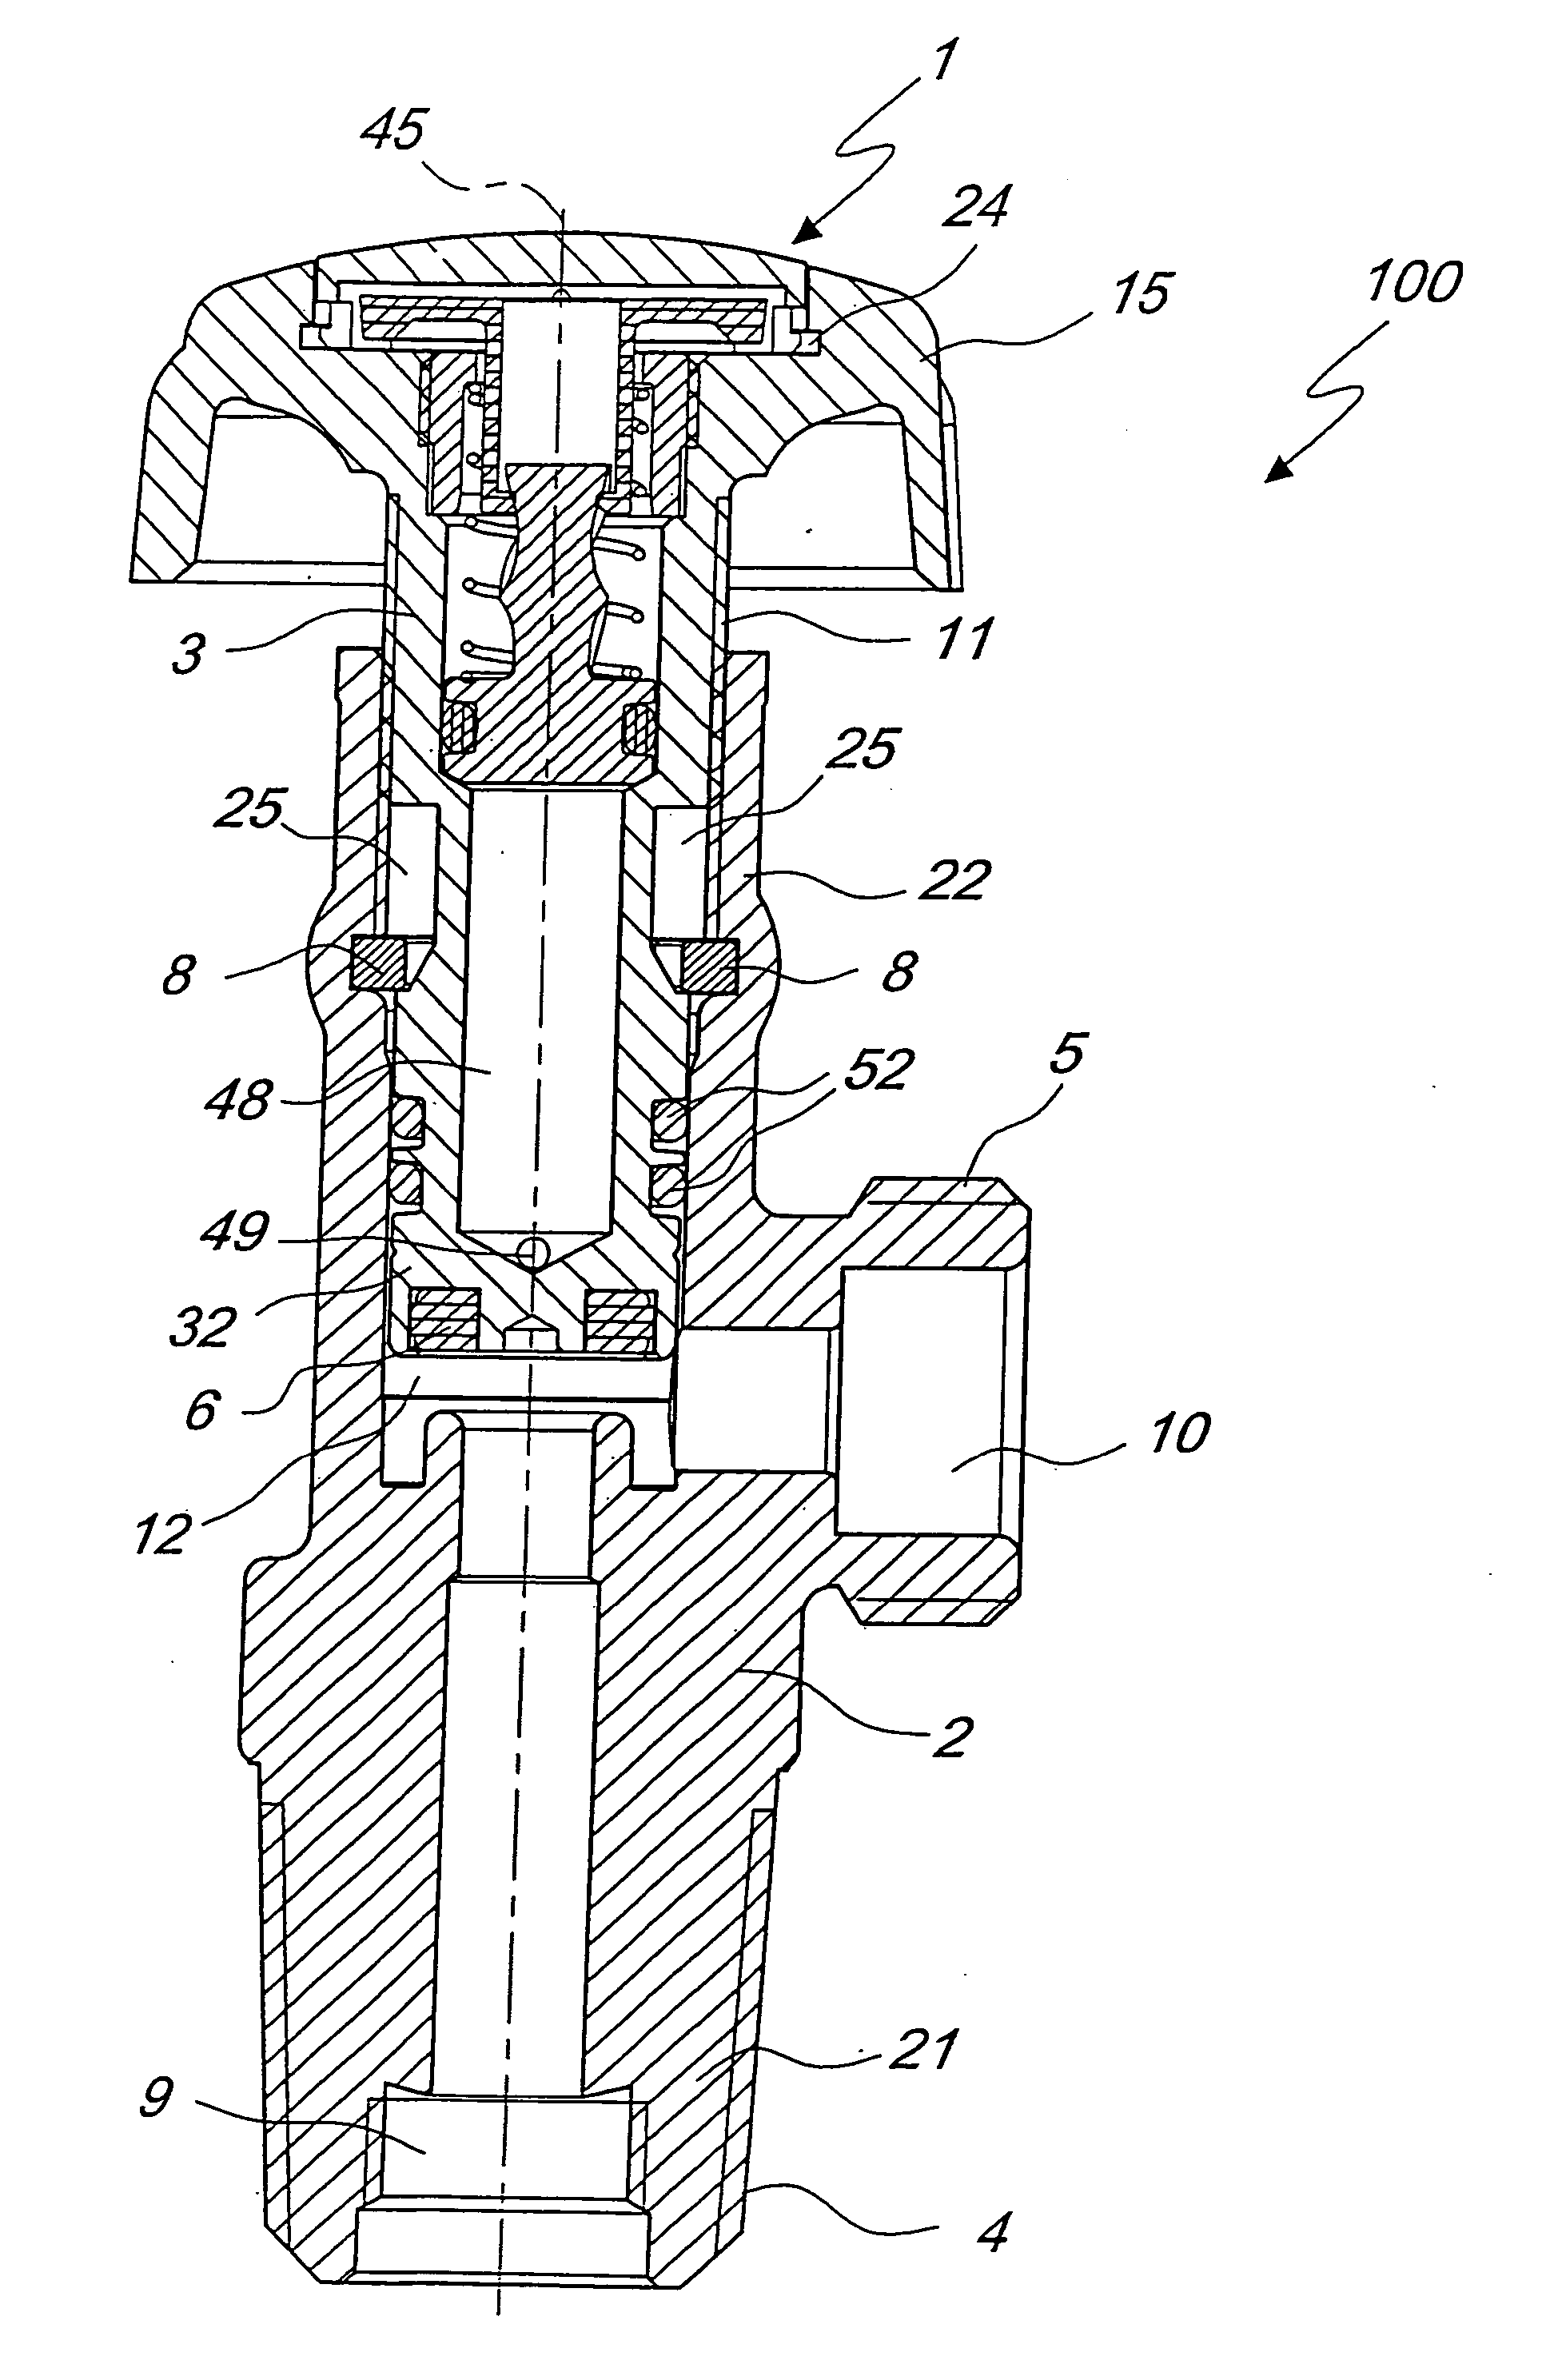 Flow control valve with device for indicating the status of a fluid, particularly for gas containers